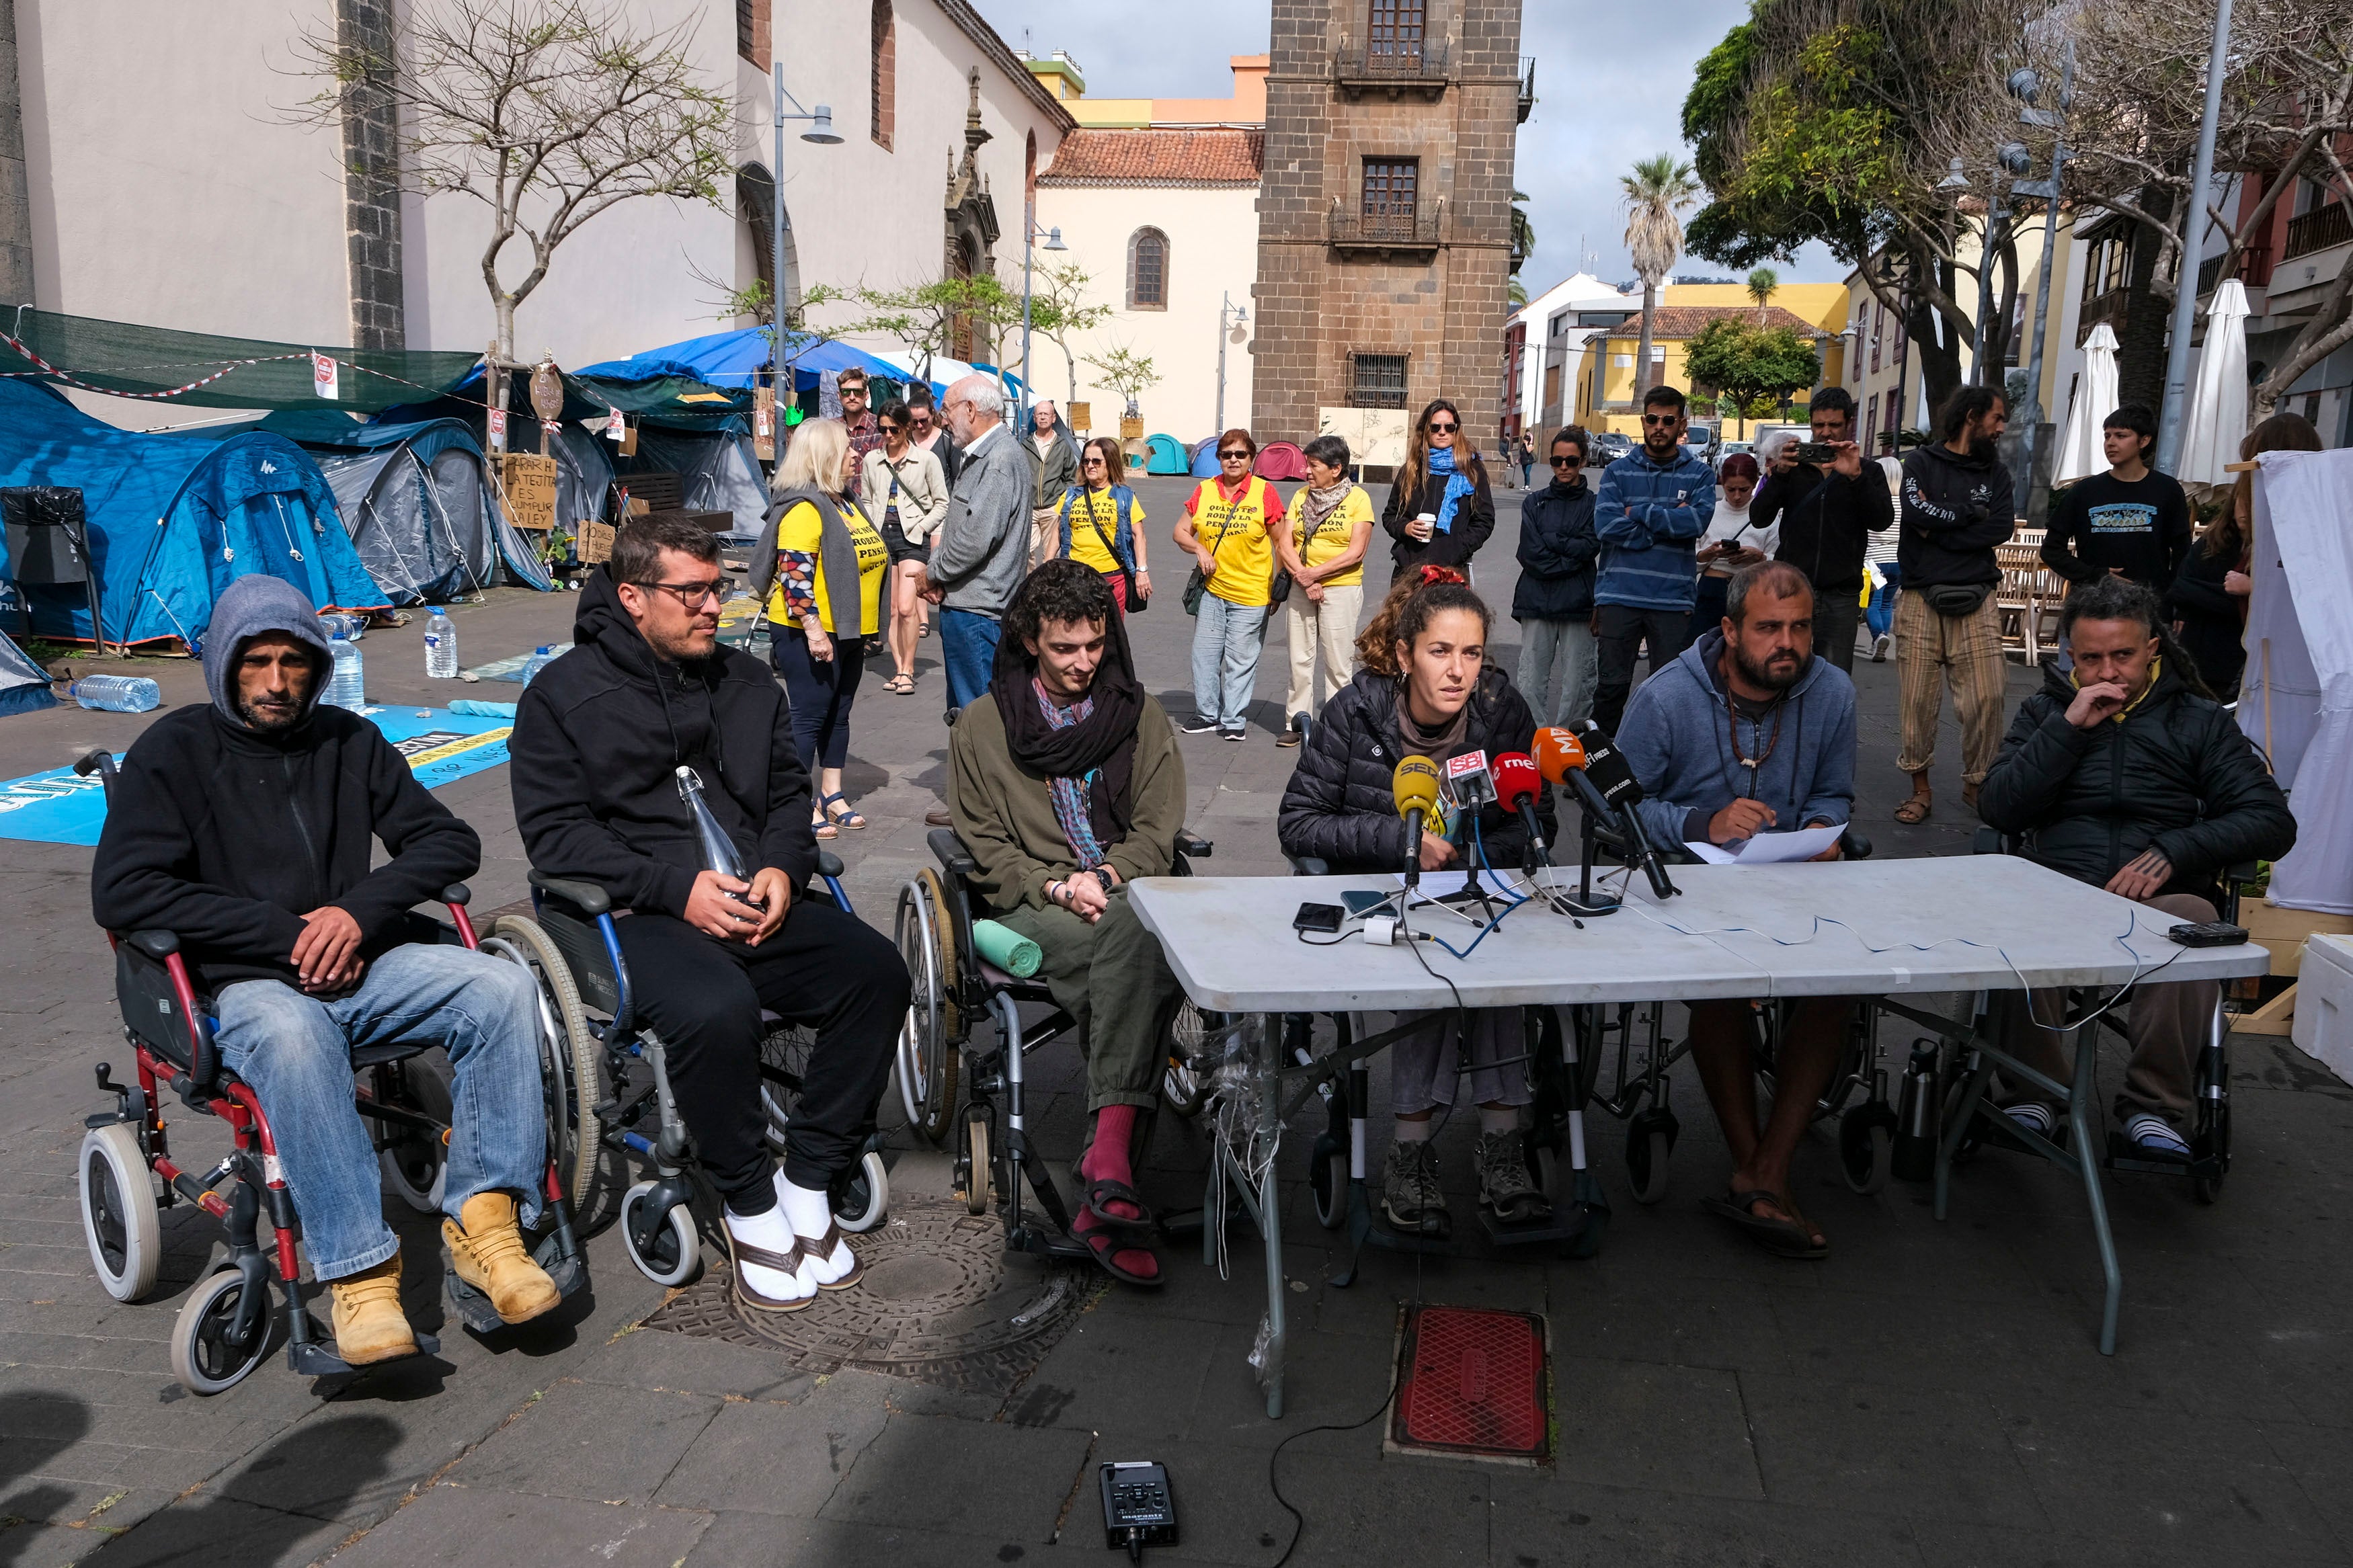 Activists on a hunger strike to demand the halt of construction of a new hotel and a touristic luxury homes complex in southern Tenerife island